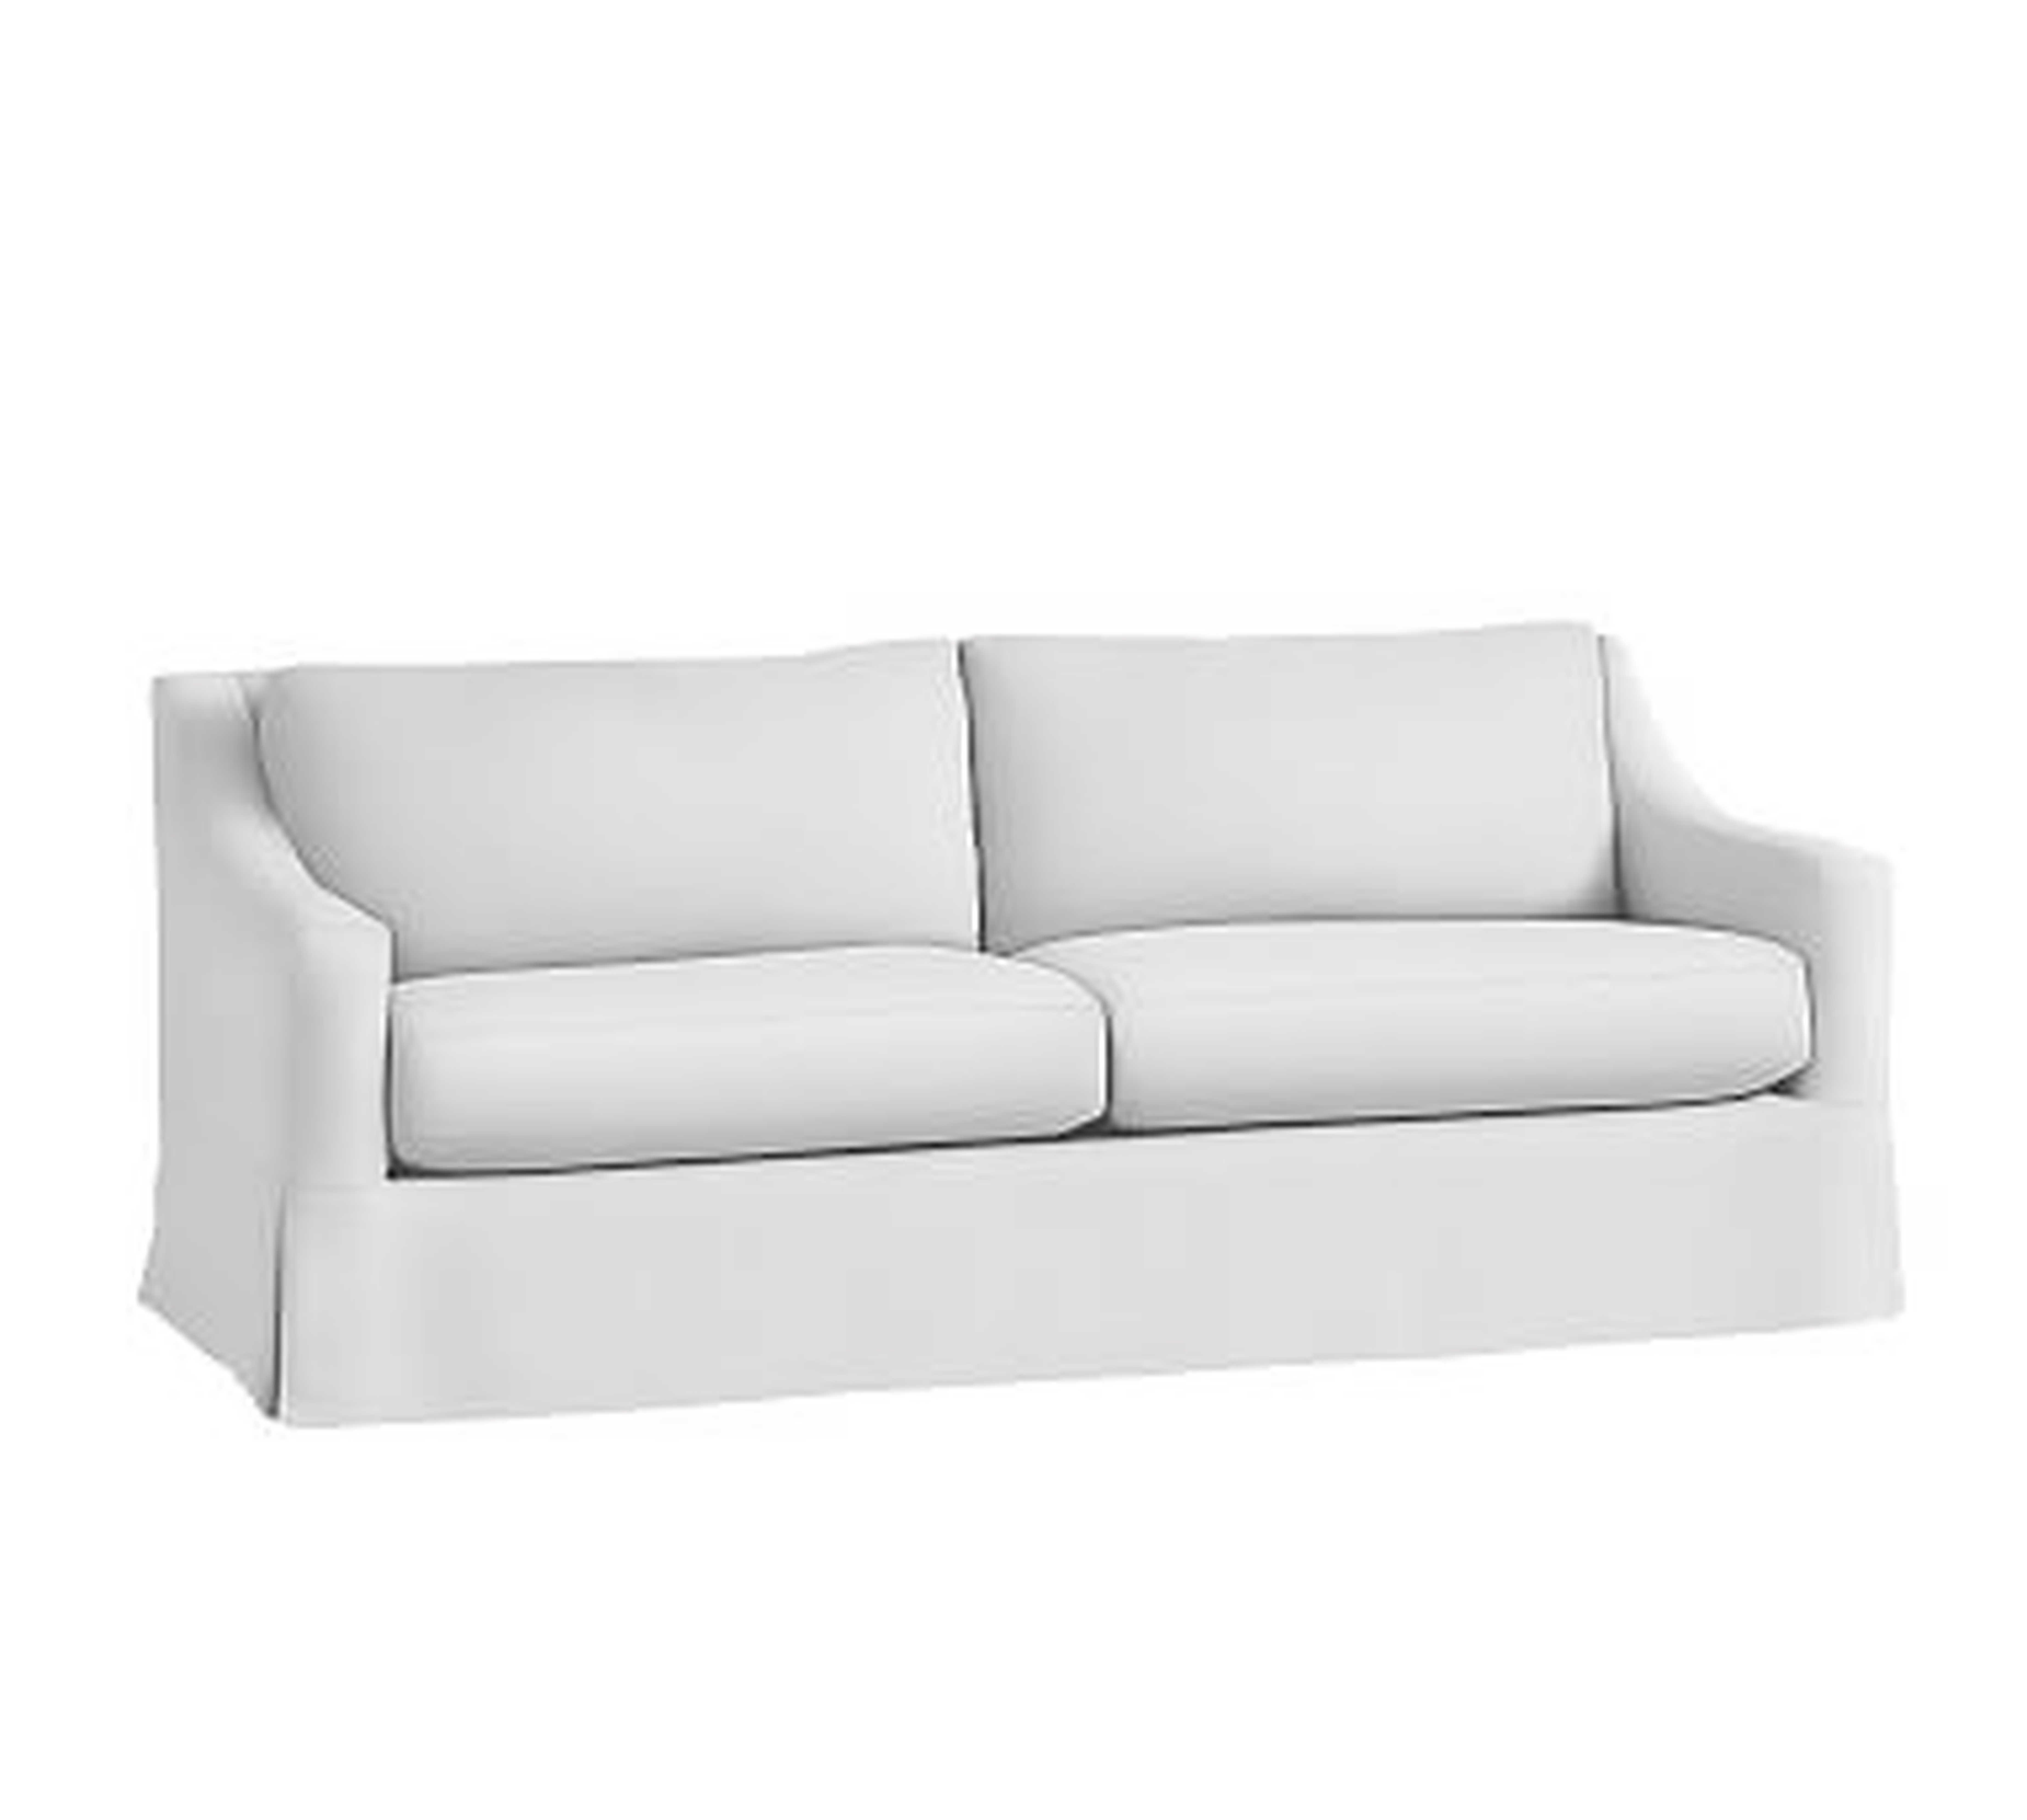 York Slope Arm Slipcovered Grand Sofa 95.5", Down Blend Wrapped Cushions, Twill White - Pottery Barn